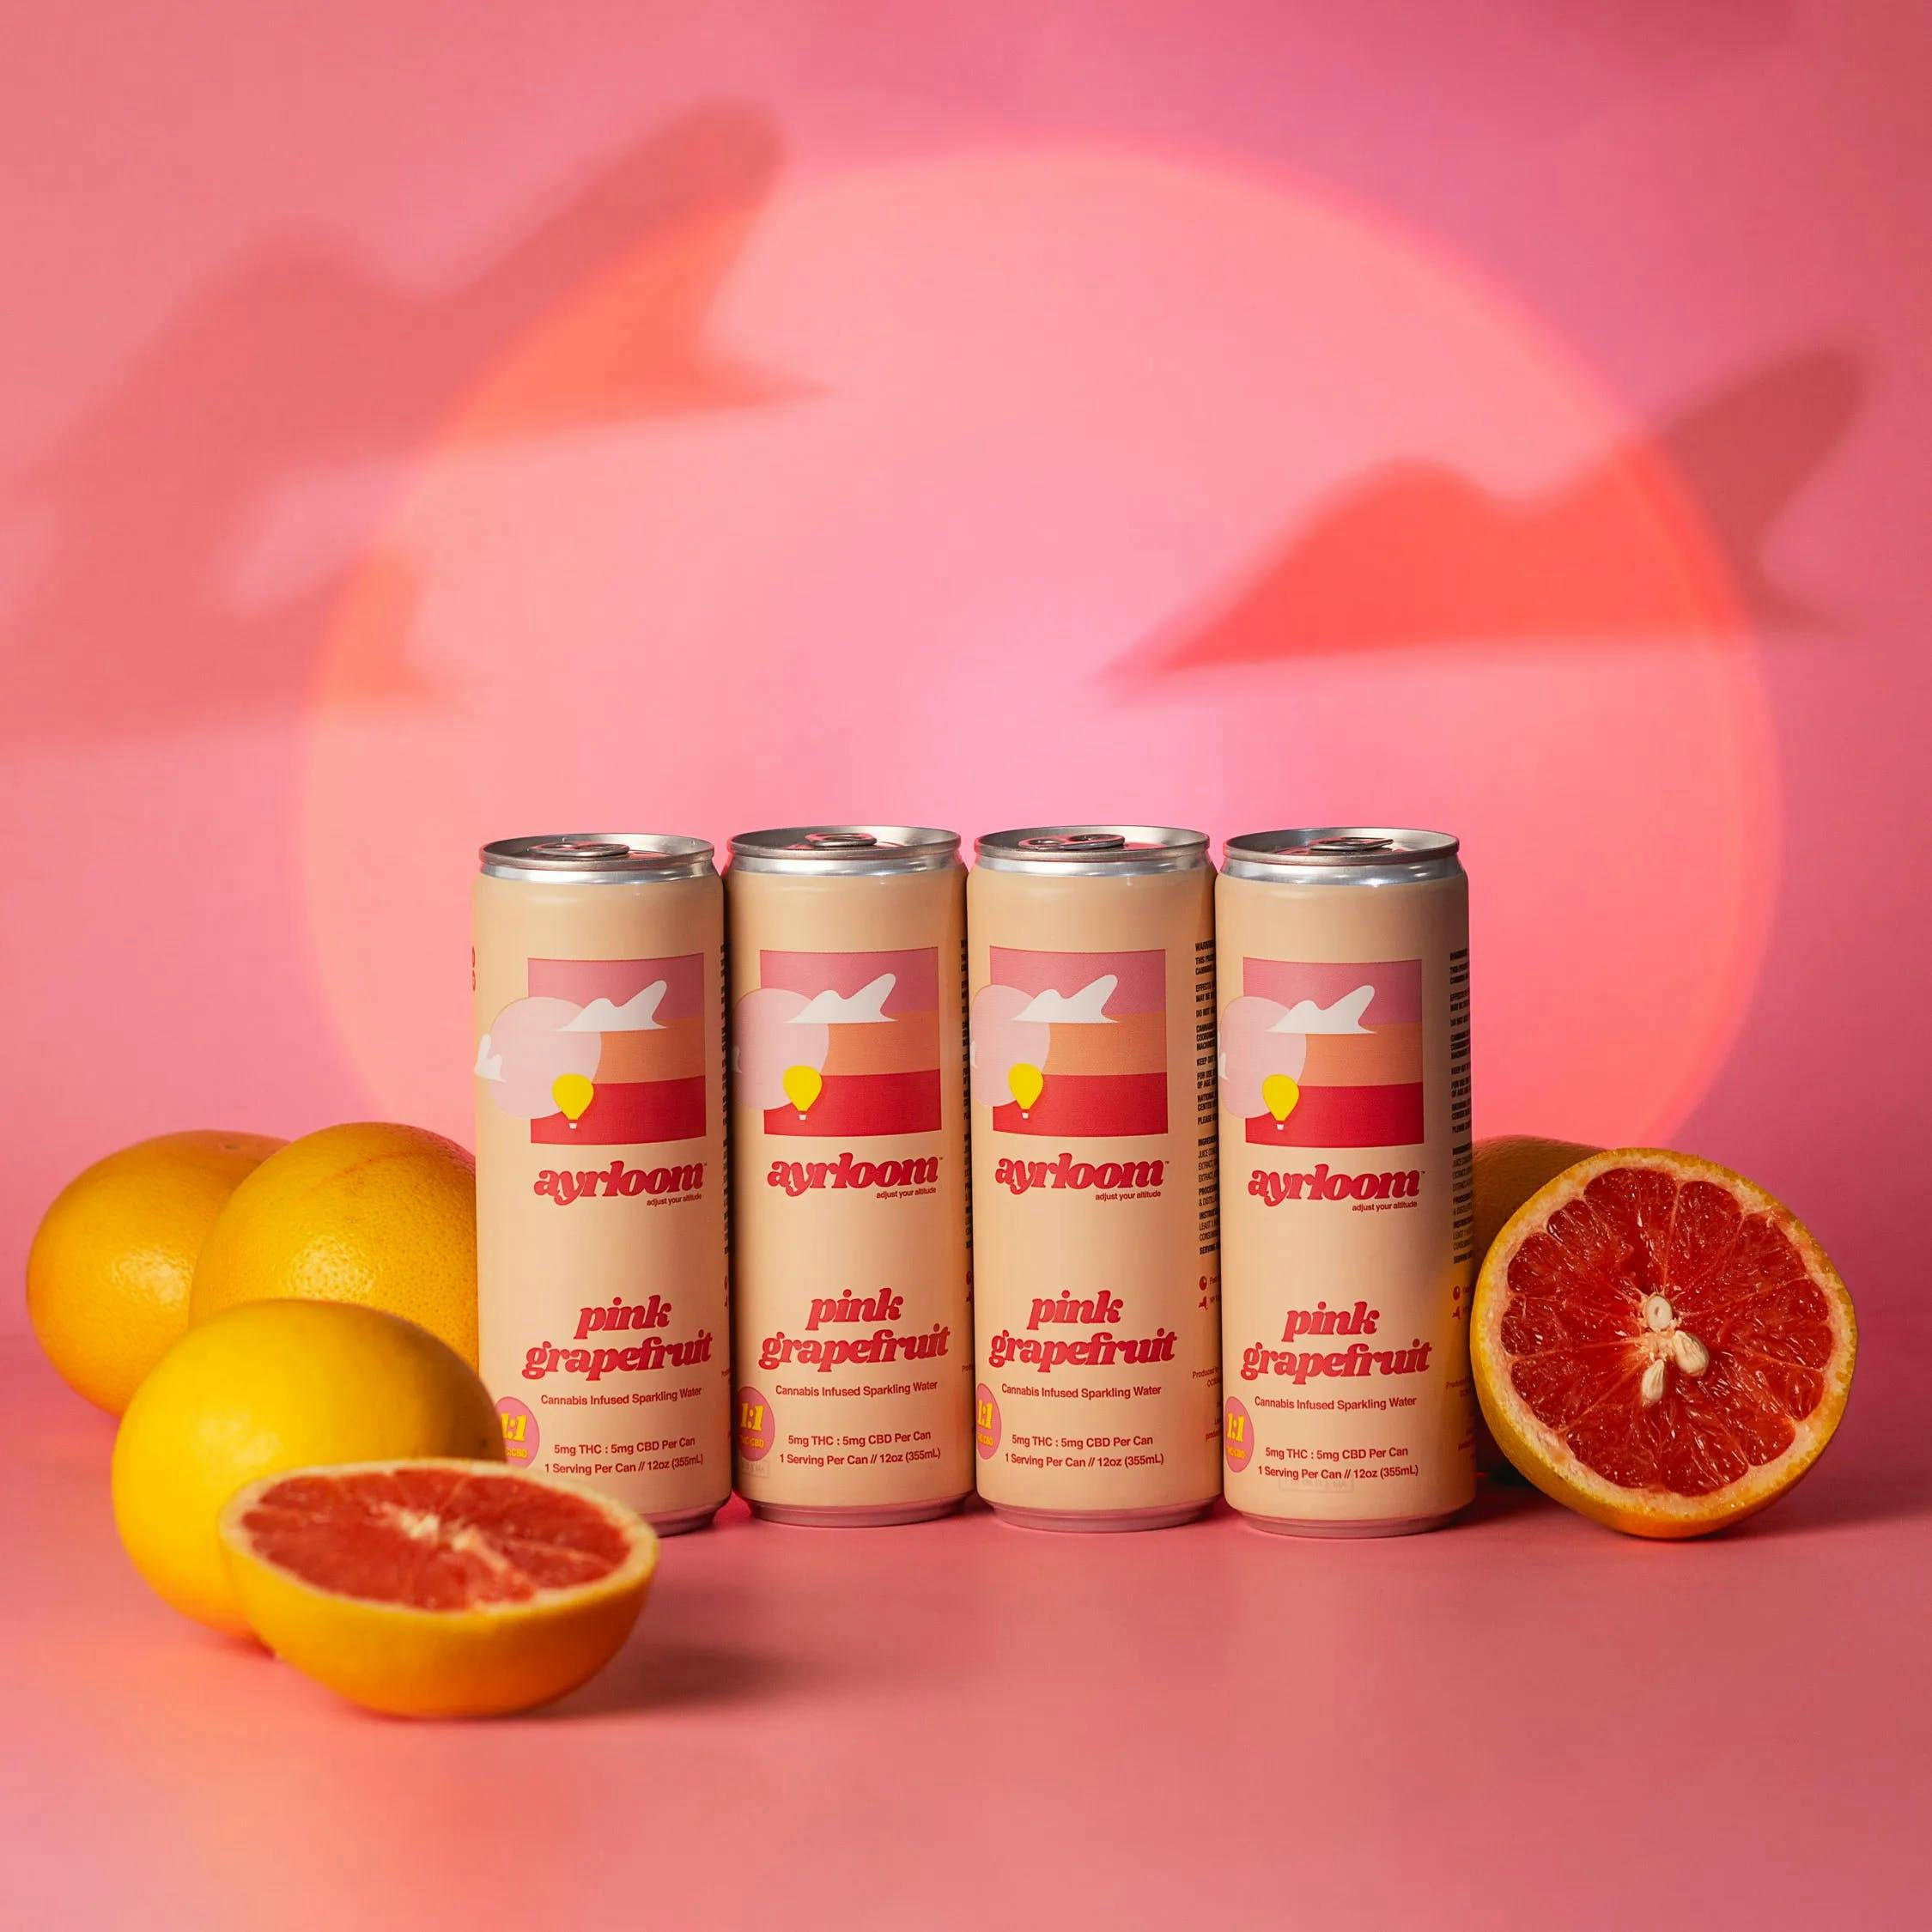 Pink Grapefruit 1:1 Infused Sparkling Water • 4 Pack - ayrloom - EDIBLES - Rockland County Weed Delivery | Treehouse Cannabis